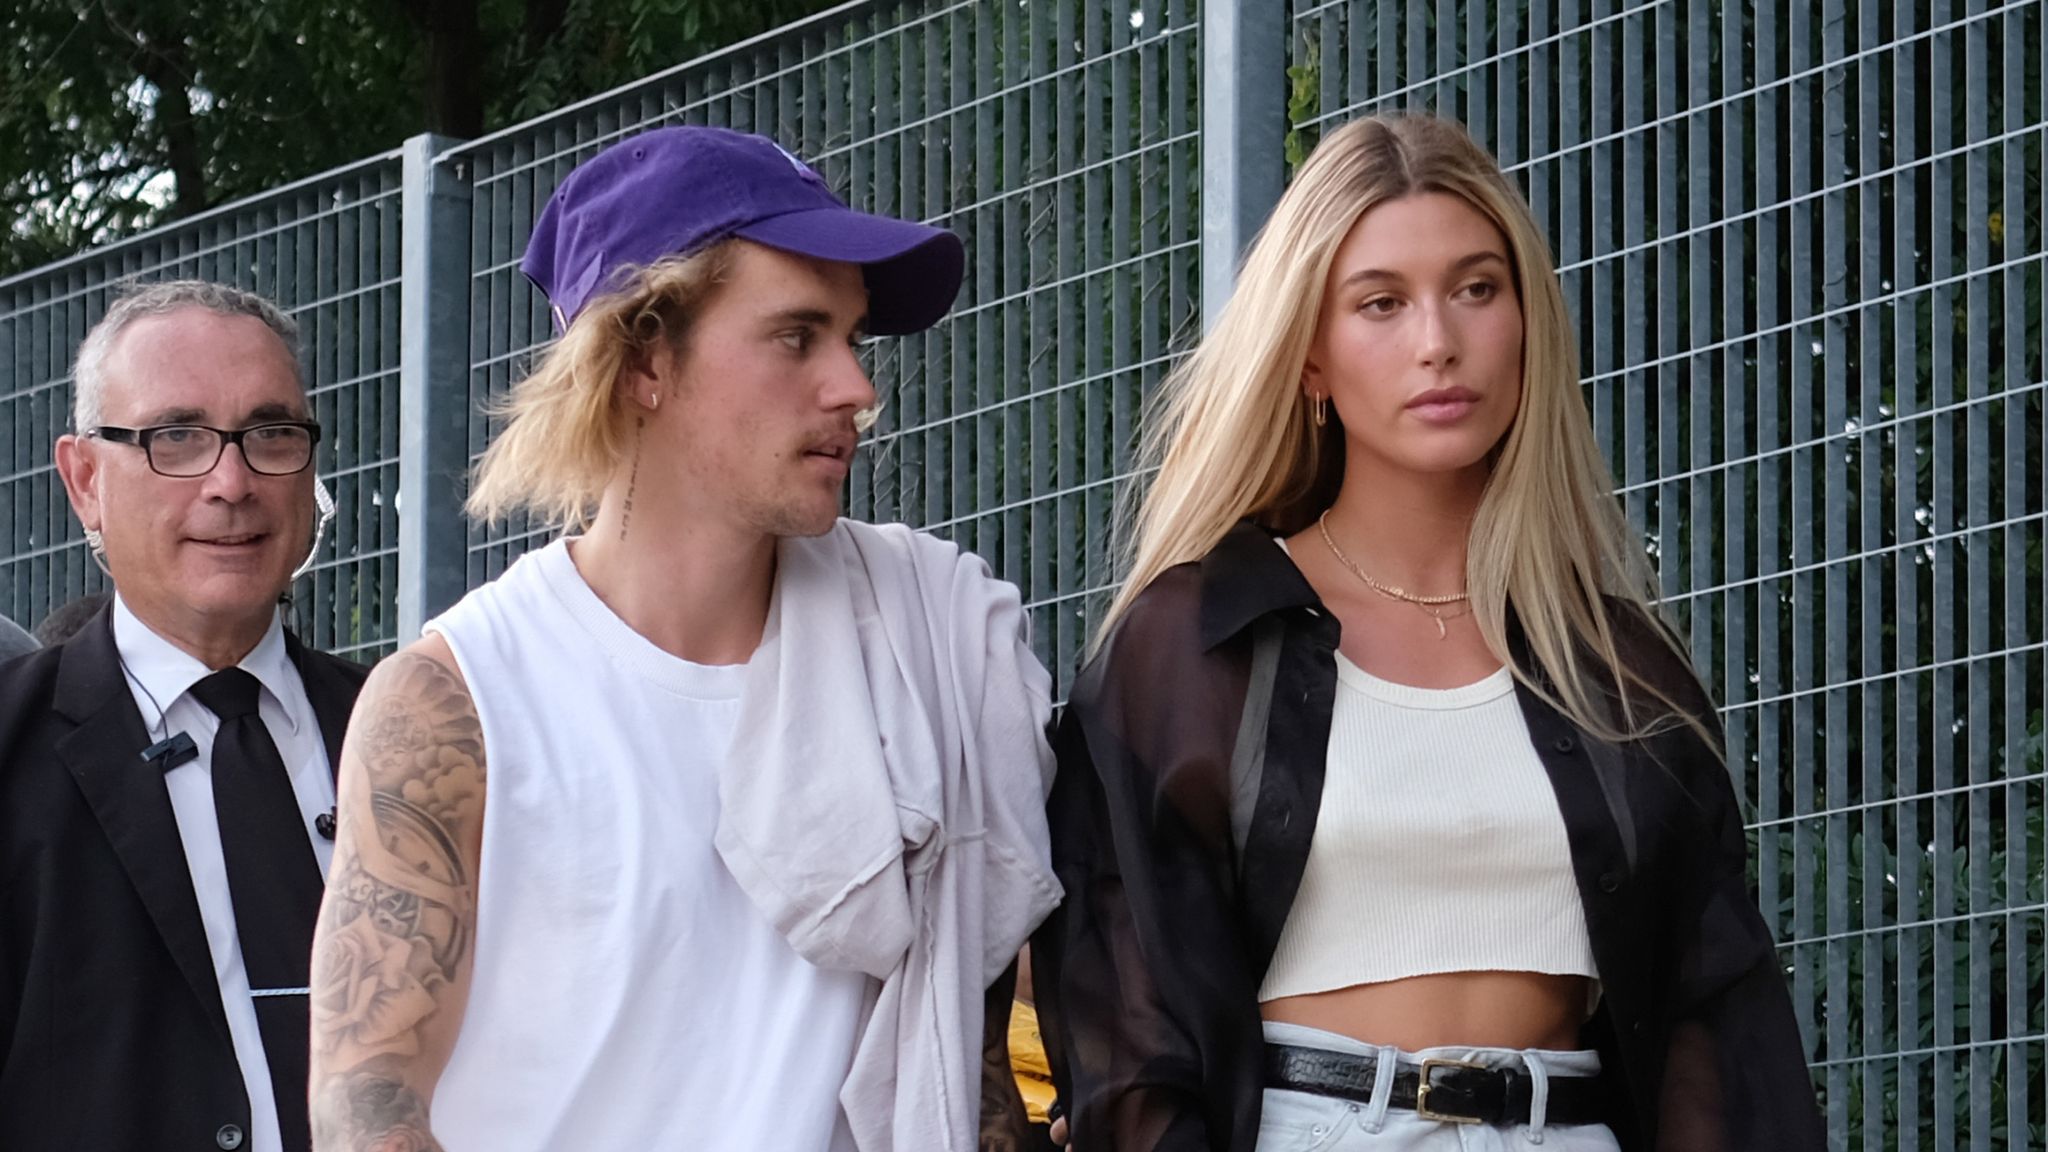 Comprehensive Outline on Justin and Hailey Bieber?